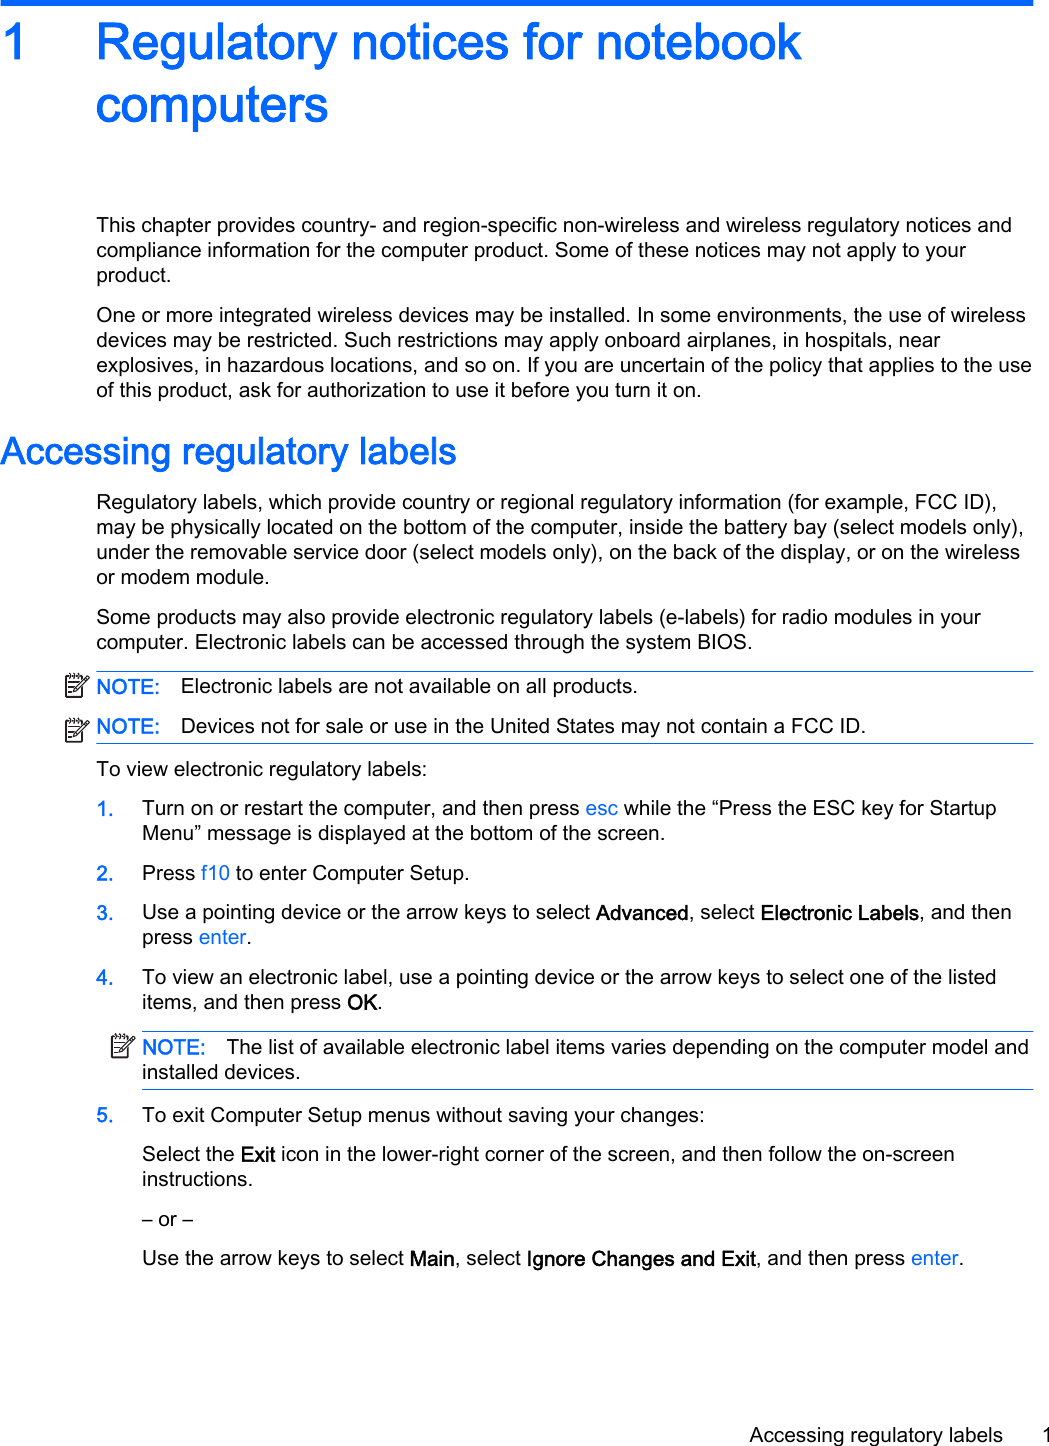 1 Regulatory notices for notebook computersThis chapter provides country- and region-specific non-wireless and wireless regulatory notices and compliance information for the computer product. Some of these notices may not apply to your product.One or more integrated wireless devices may be installed. In some environments, the use of wireless devices may be restricted. Such restrictions may apply onboard airplanes, in hospitals, near explosives, in hazardous locations, and so on. If you are uncertain of the policy that applies to the use of this product, ask for authorization to use it before you turn it on.Accessing regulatory labelsRegulatory labels, which provide country or regional regulatory information (for example, FCC ID), may be physically located on the bottom of the computer, inside the battery bay (select models only), under the removable service door (select models only), on the back of the display, or on the wireless or modem module.Some products may also provide electronic regulatory labels (e-labels) for radio modules in your computer. Electronic labels can be accessed through the system BIOS.NOTE: Electronic labels are not available on all products.NOTE: Devices not for sale or use in the United States may not contain a FCC ID. To view electronic regulatory labels:1. Turn on or restart the computer, and then press esc while the “Press the ESC key for Startup Menu” message is displayed at the bottom of the screen.2. Press f10 to enter Computer Setup.3. Use a pointing device or the arrow keys to select Advanced, select Electronic Labels, and then press enter.4. To view an electronic label, use a pointing device or the arrow keys to select one of the listed items, and then press OK.NOTE: The list of available electronic label items varies depending on the computer model and installed devices.5. To exit Computer Setup menus without saving your changes:Select the Exit icon in the lower-right corner of the screen, and then follow the on-screen instructions.– or –Use the arrow keys to select Main, select Ignore Changes and Exit, and then press enter.Accessing regulatory labels 1